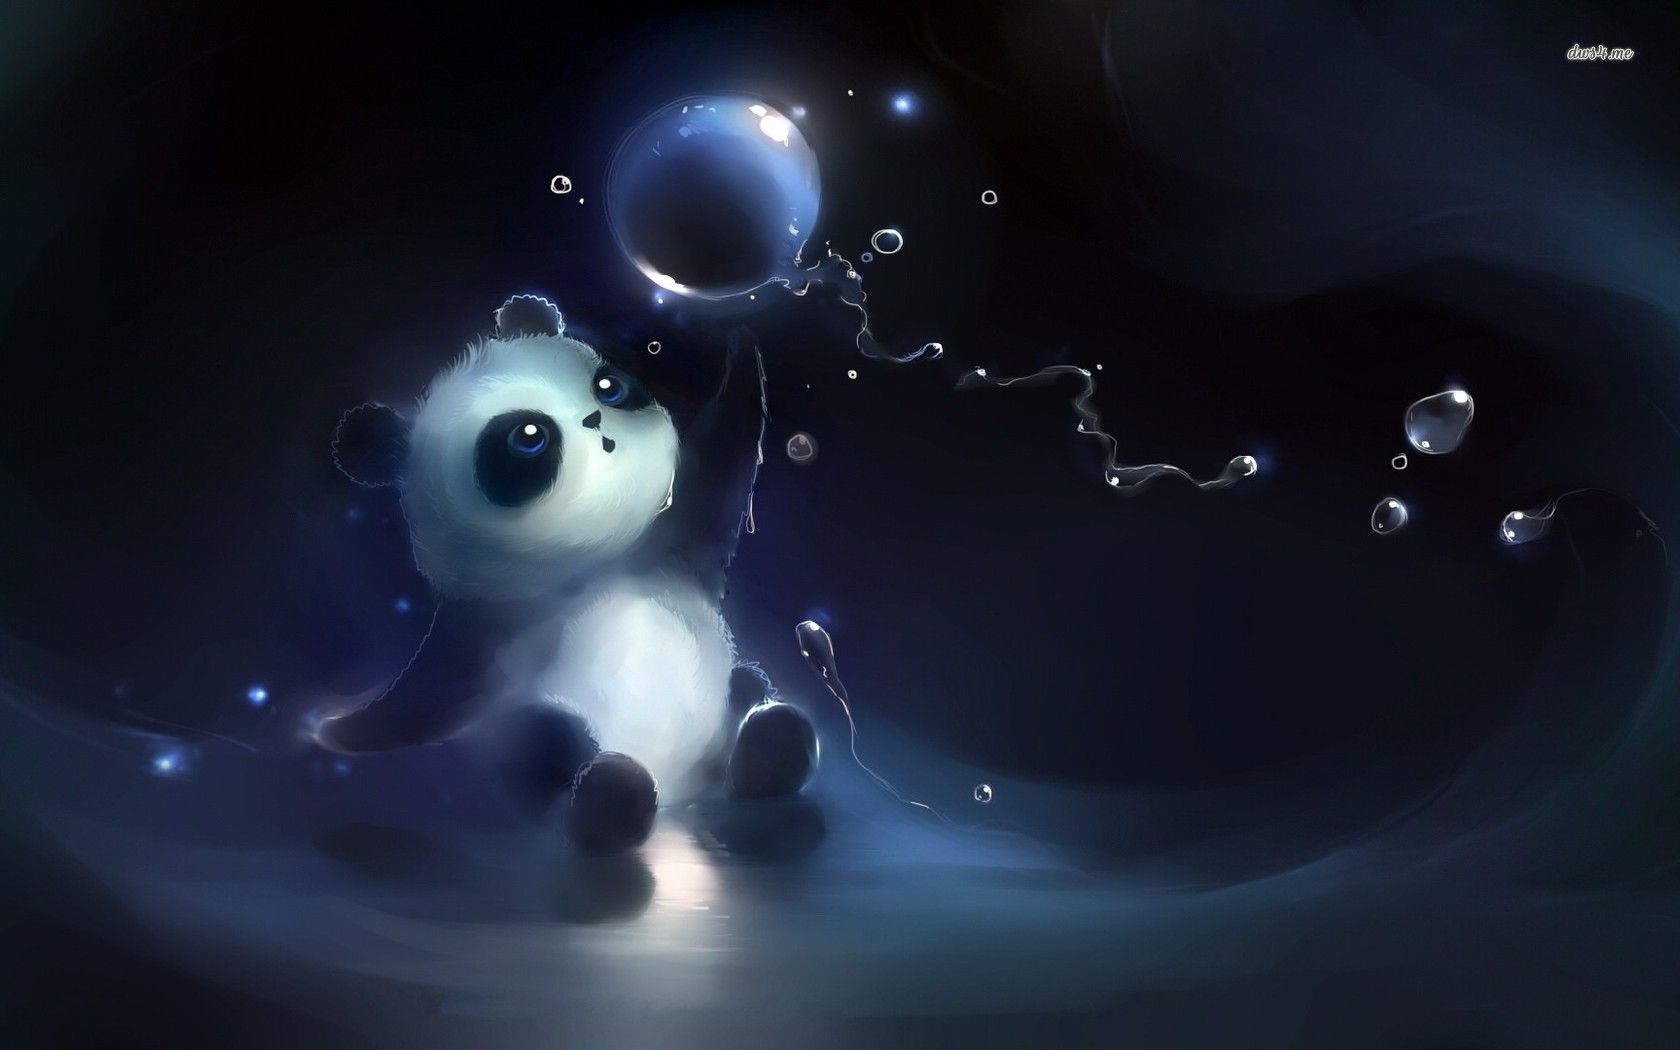 Cute panda playing with bubbles wallpaper - Artistic wallpapers